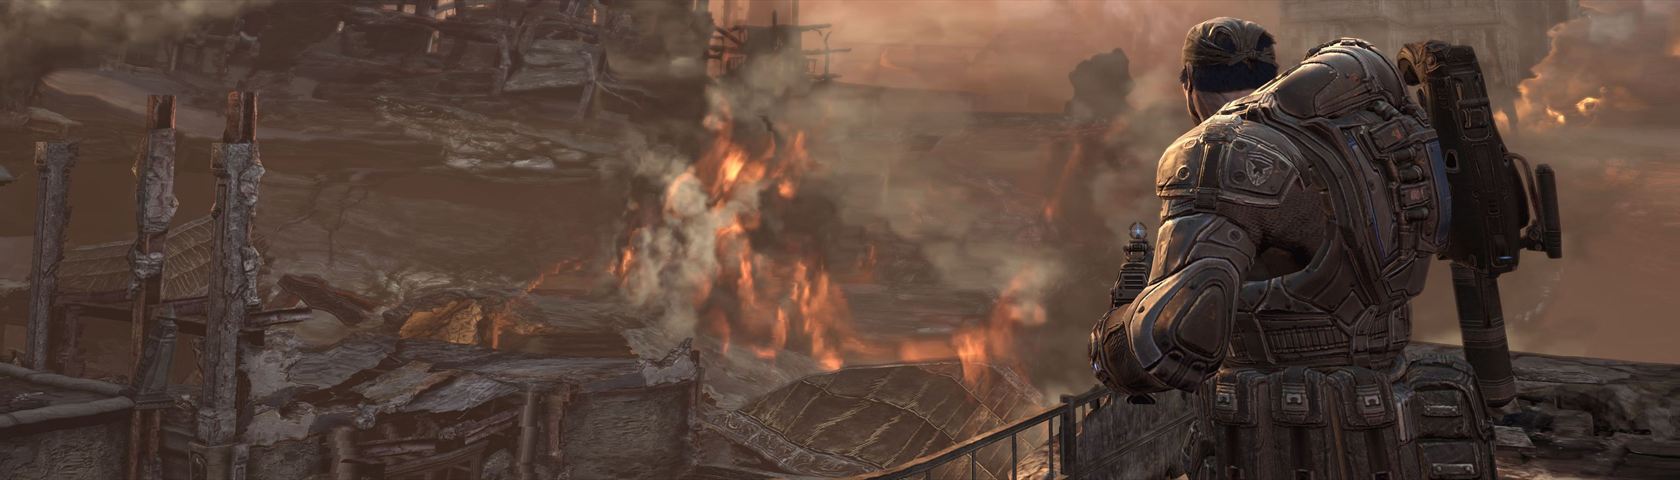 Gears of War 3: Over the Flames